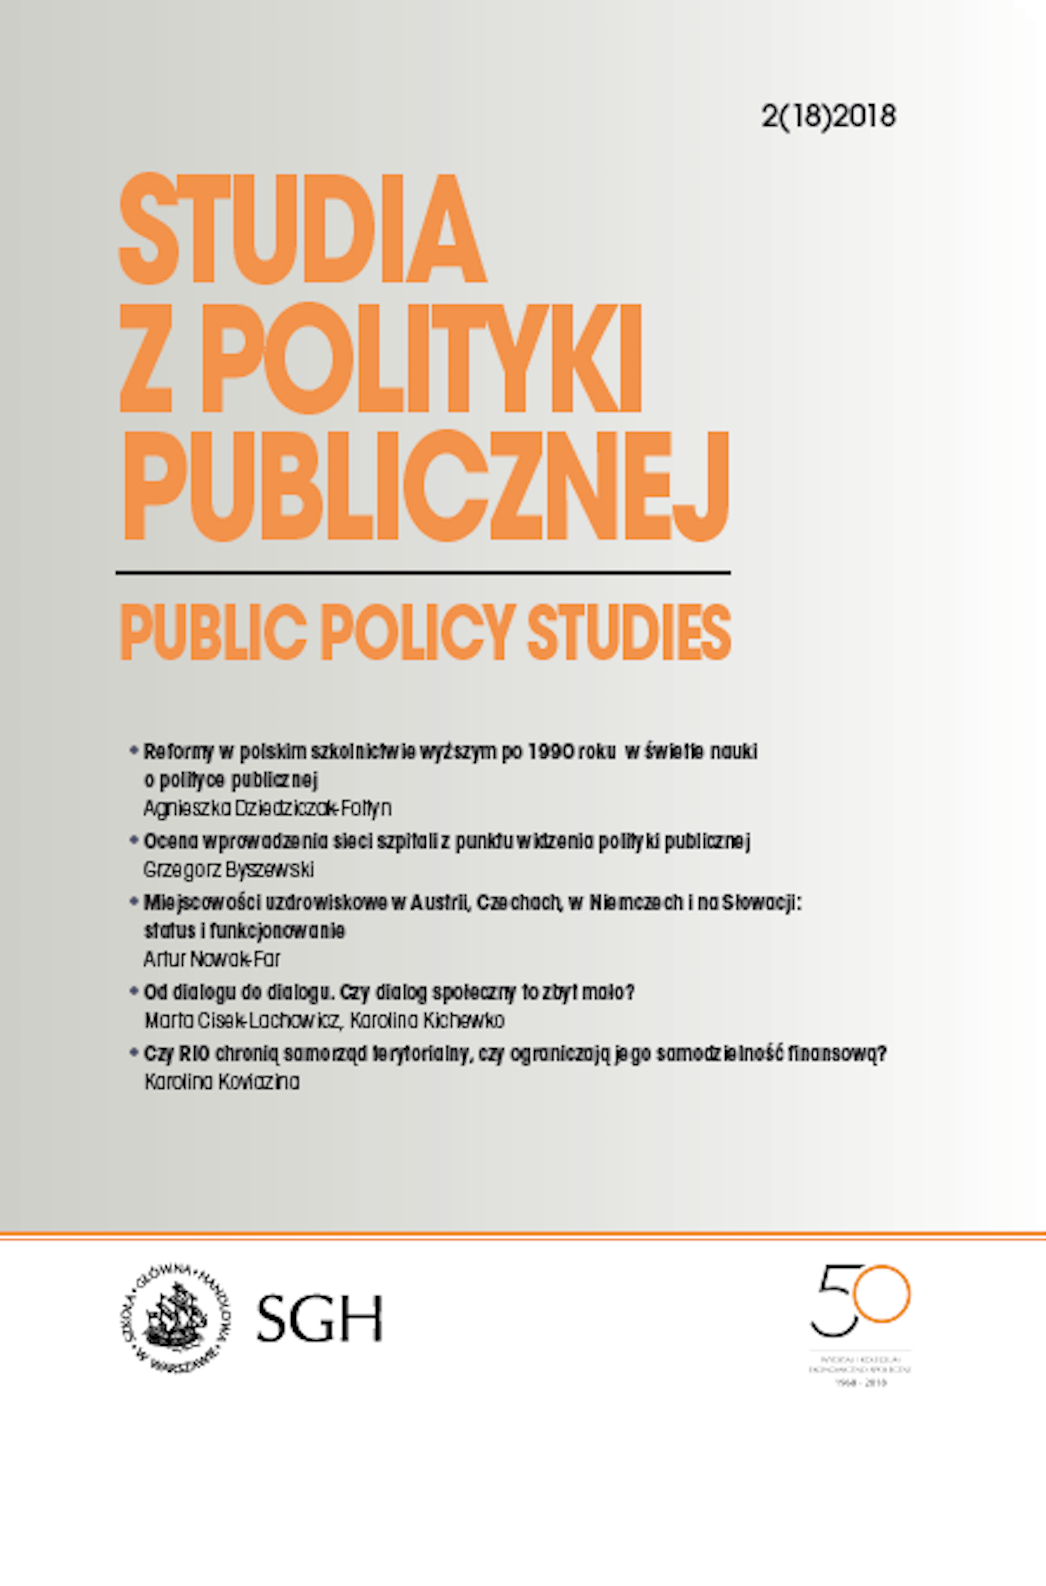 Public policymaking and its analysis at National and European levels Cover Image